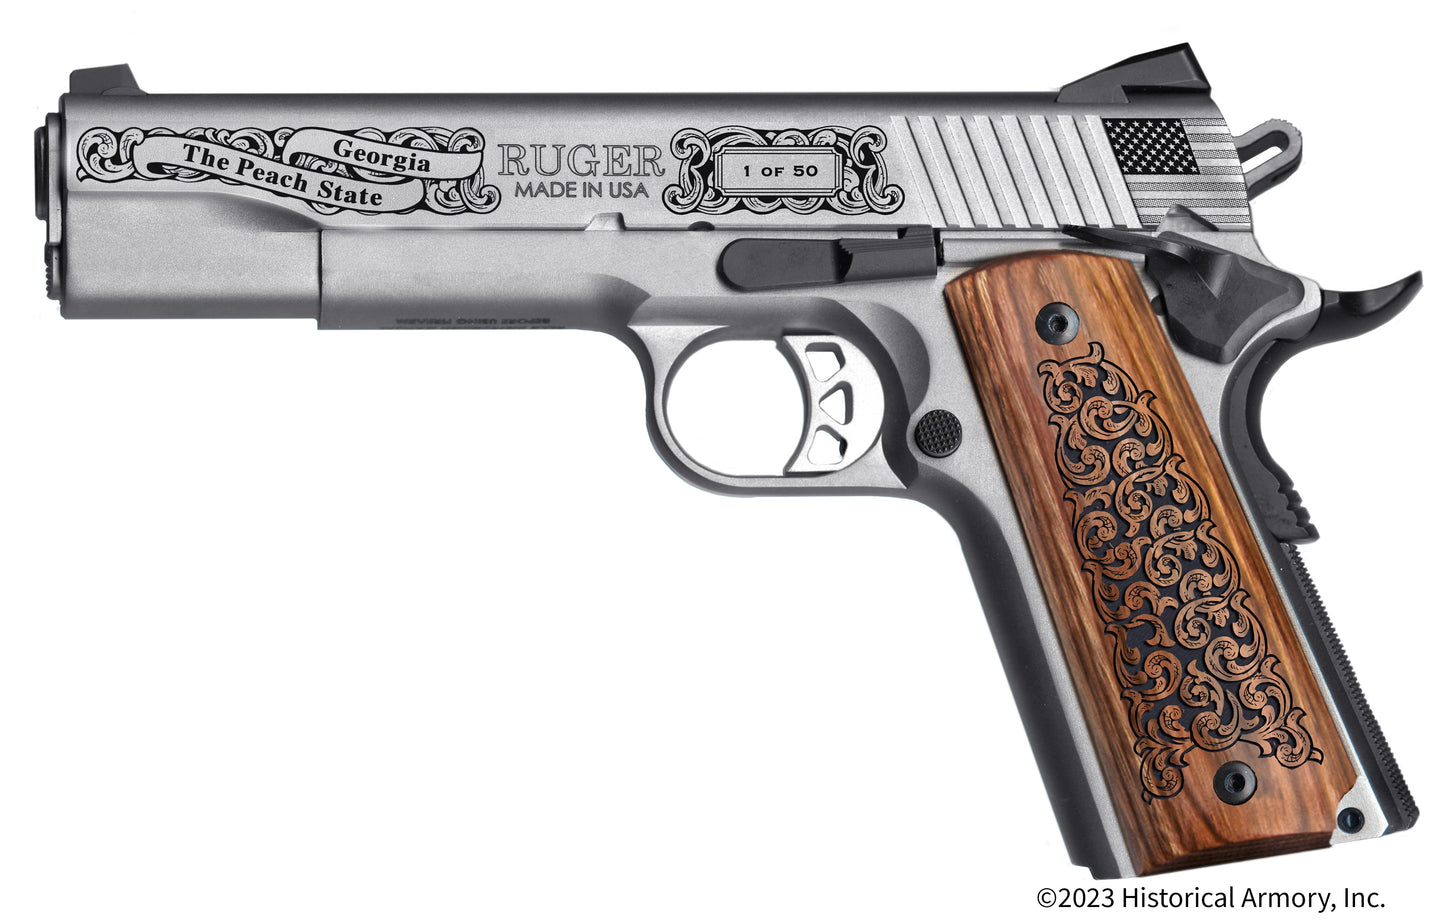 Bulloch County Georgia Engraved .45 Auto Ruger 1911